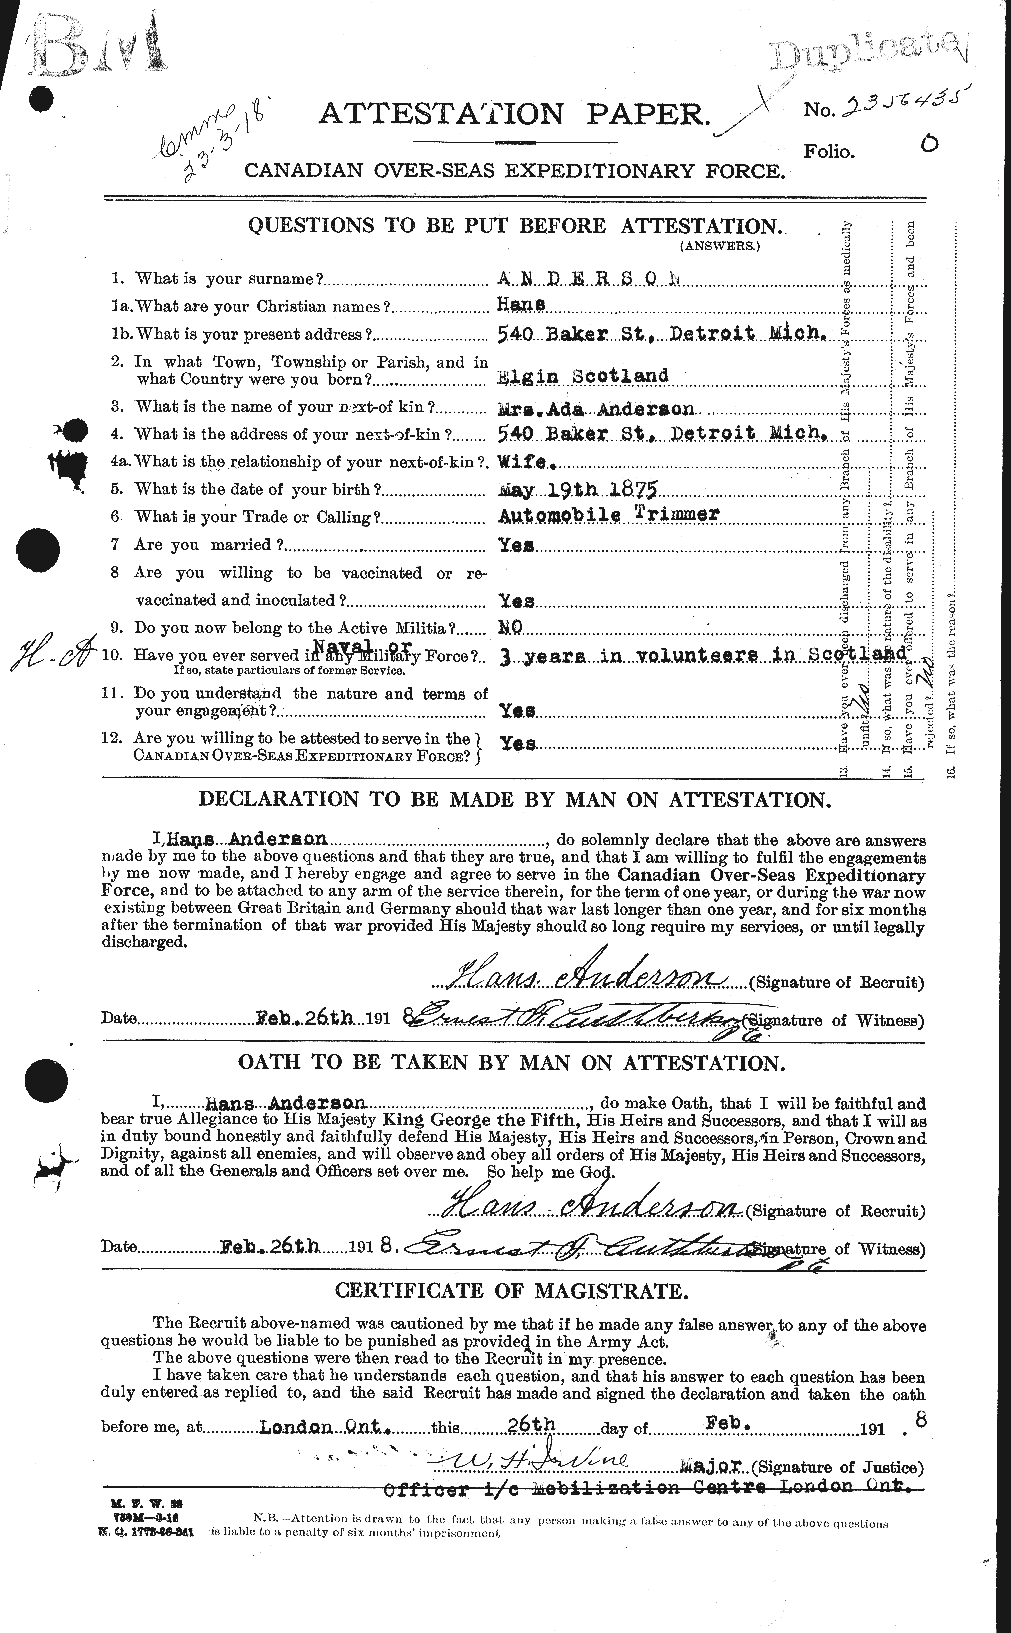 Personnel Records of the First World War - CEF 209633a